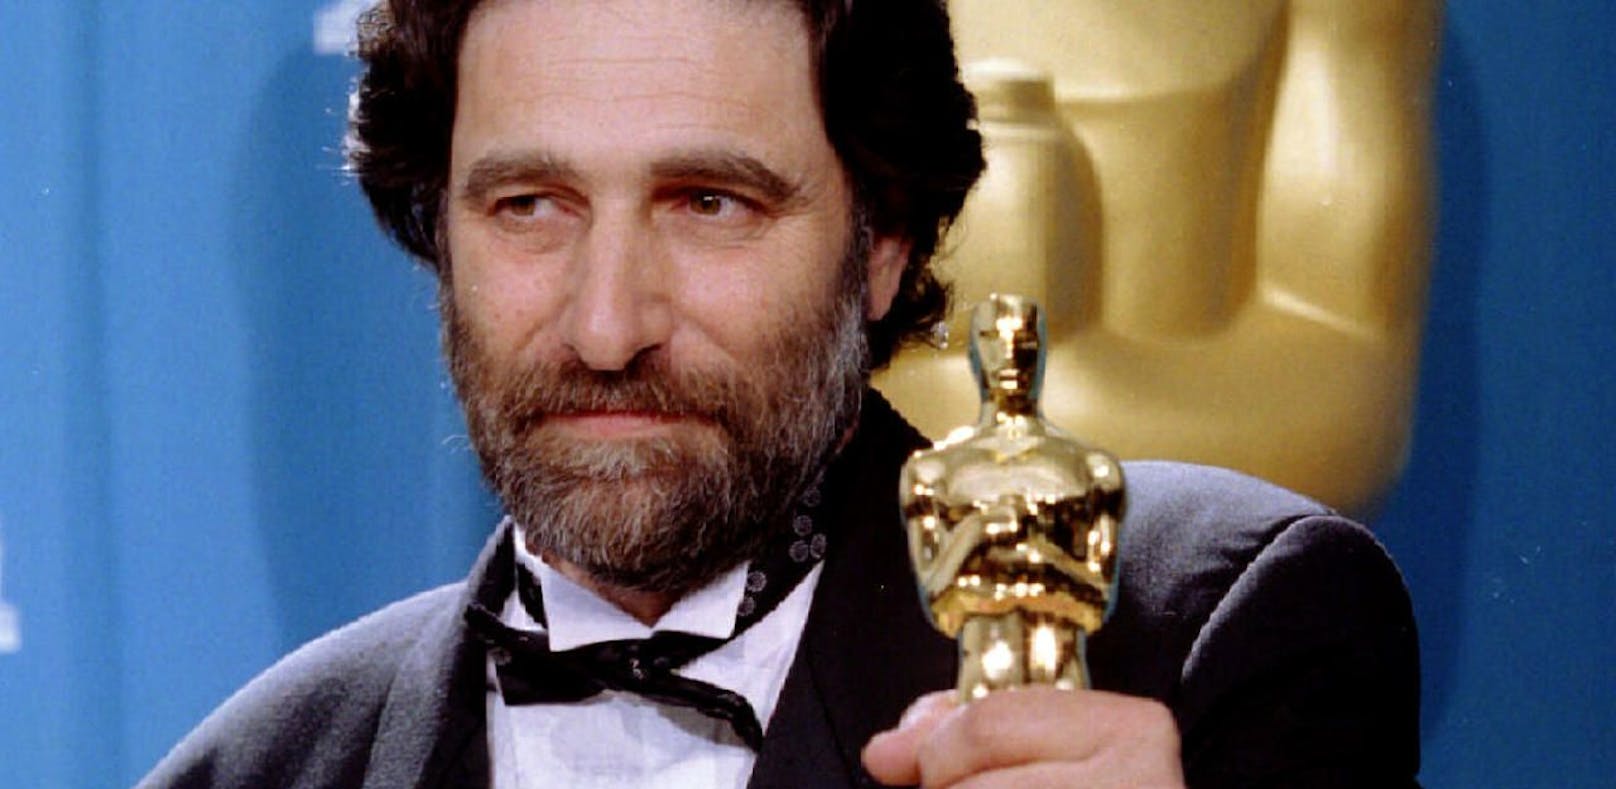 Eric Roth holds his Oscar for Best Adapted Screenplay March 27 during the 67th Annual Academy Awards at the Shrine Auditorium. Roth adapted the screenplay for &quot;Forrest Gump&quot;, which swept the Academy Awards by winning a total of six Oscars - RTXG5N8